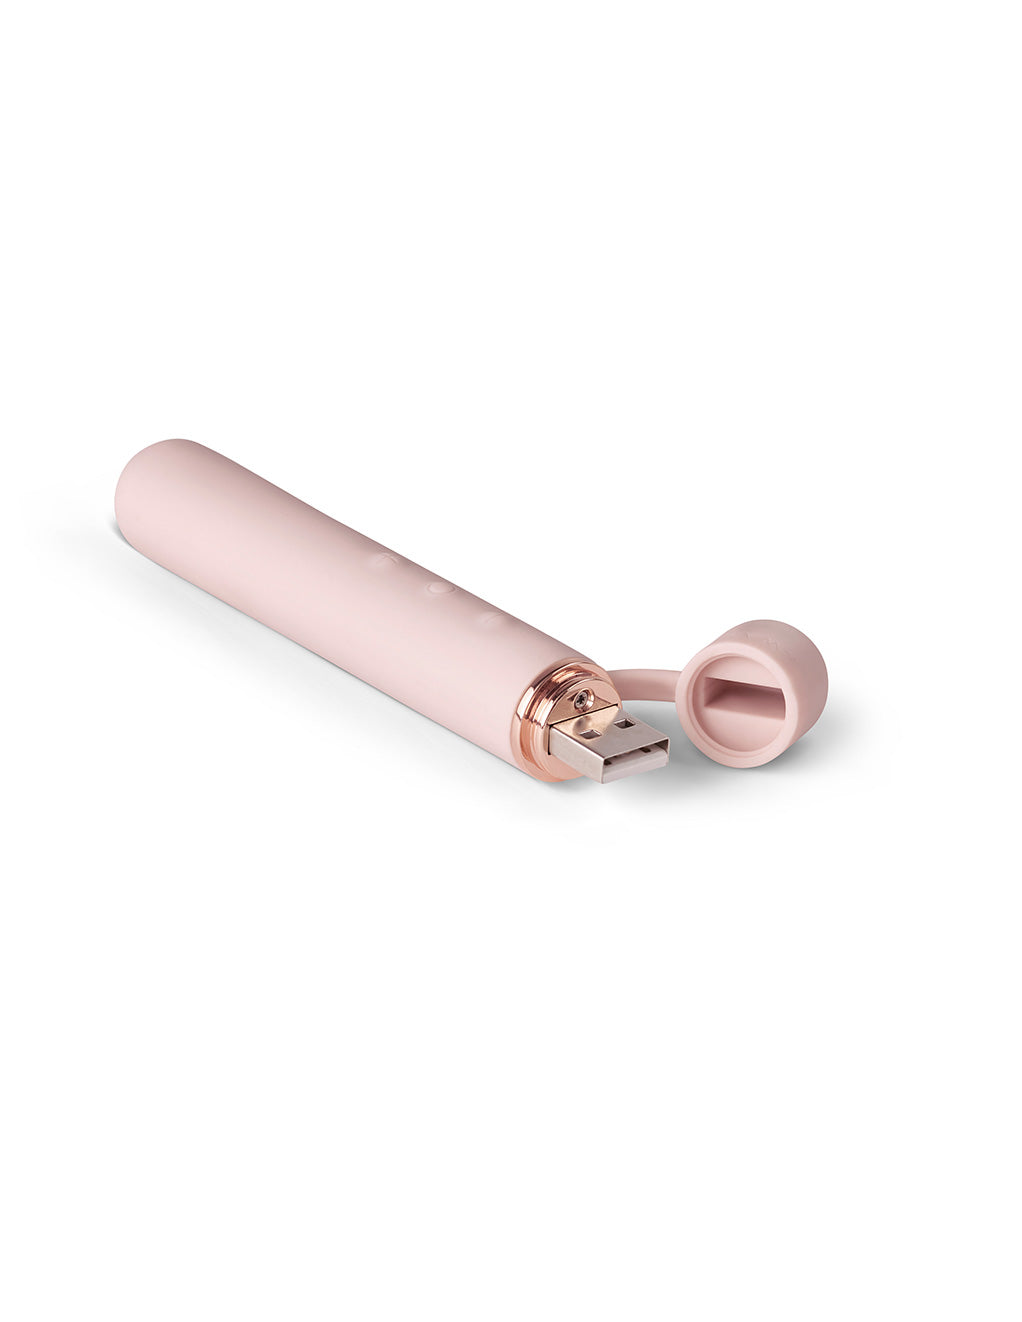 Le Wand Baton Rechargeable Clitoral Vibrator- Rose Gold- Charger